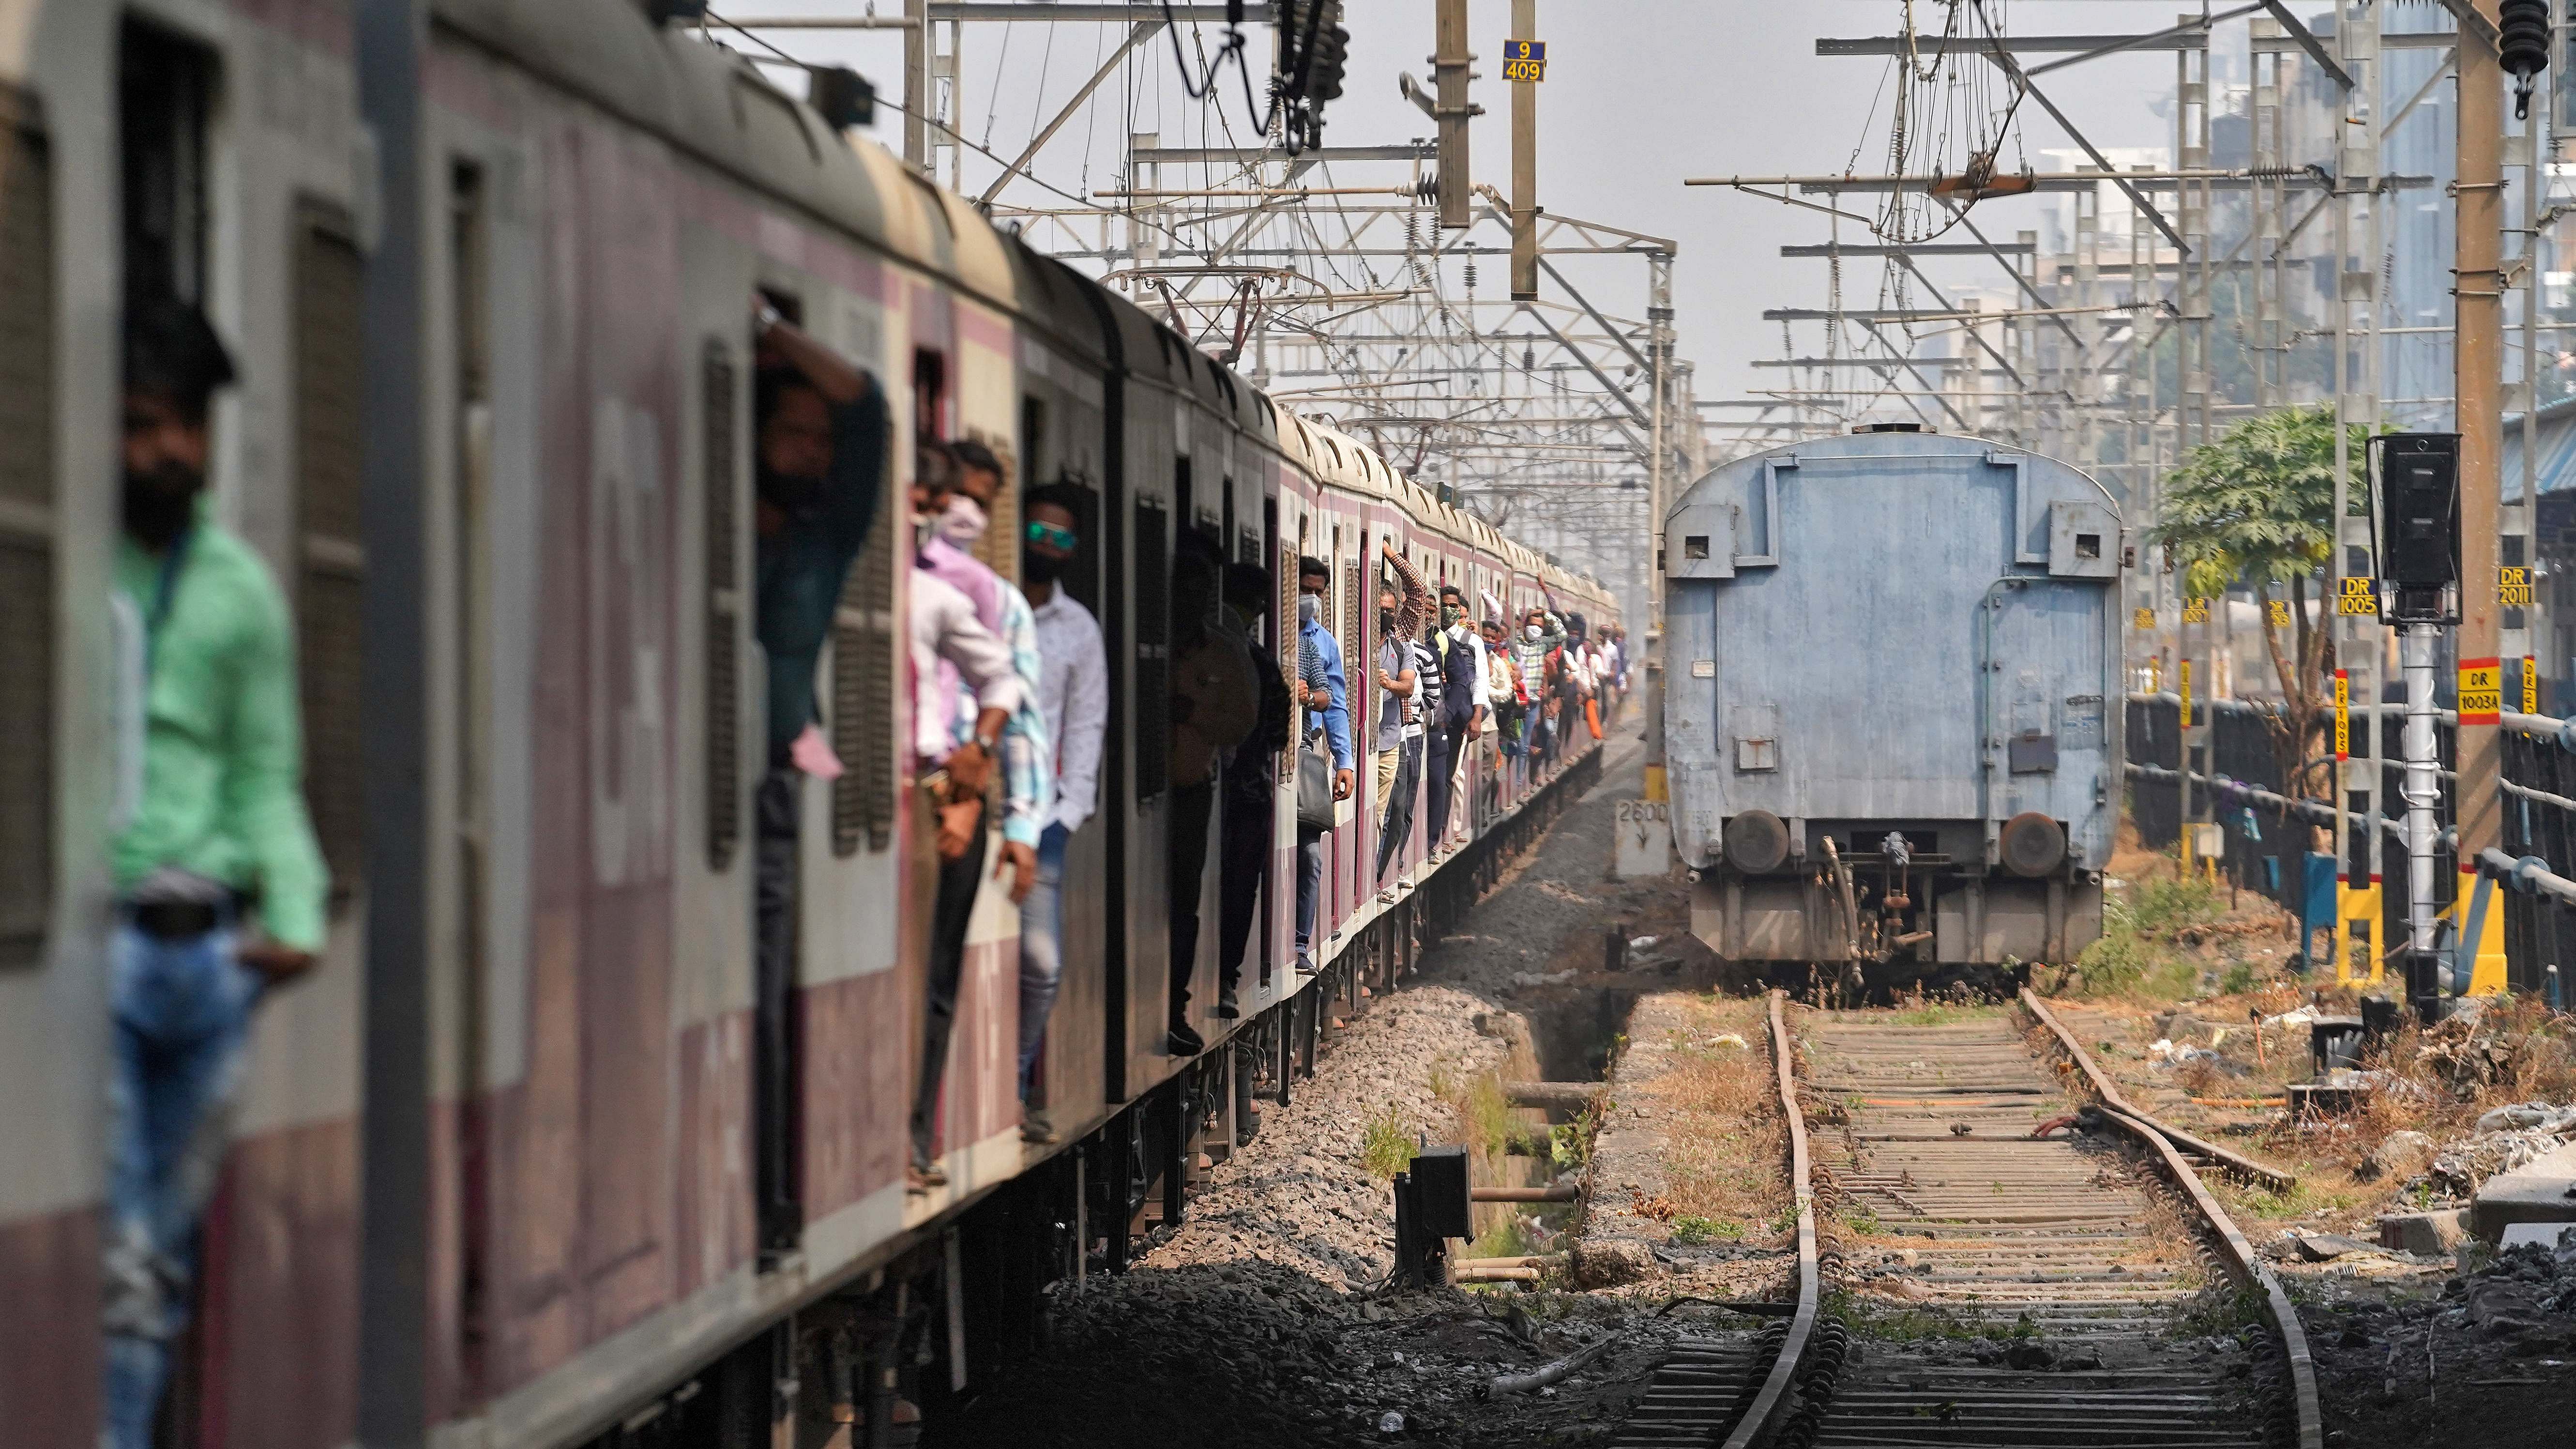 The system is operational in the Churchgate-Virar section of the suburban network in the Mumbai Metropolitan Region (MMR). Credit: Reuters File Photo